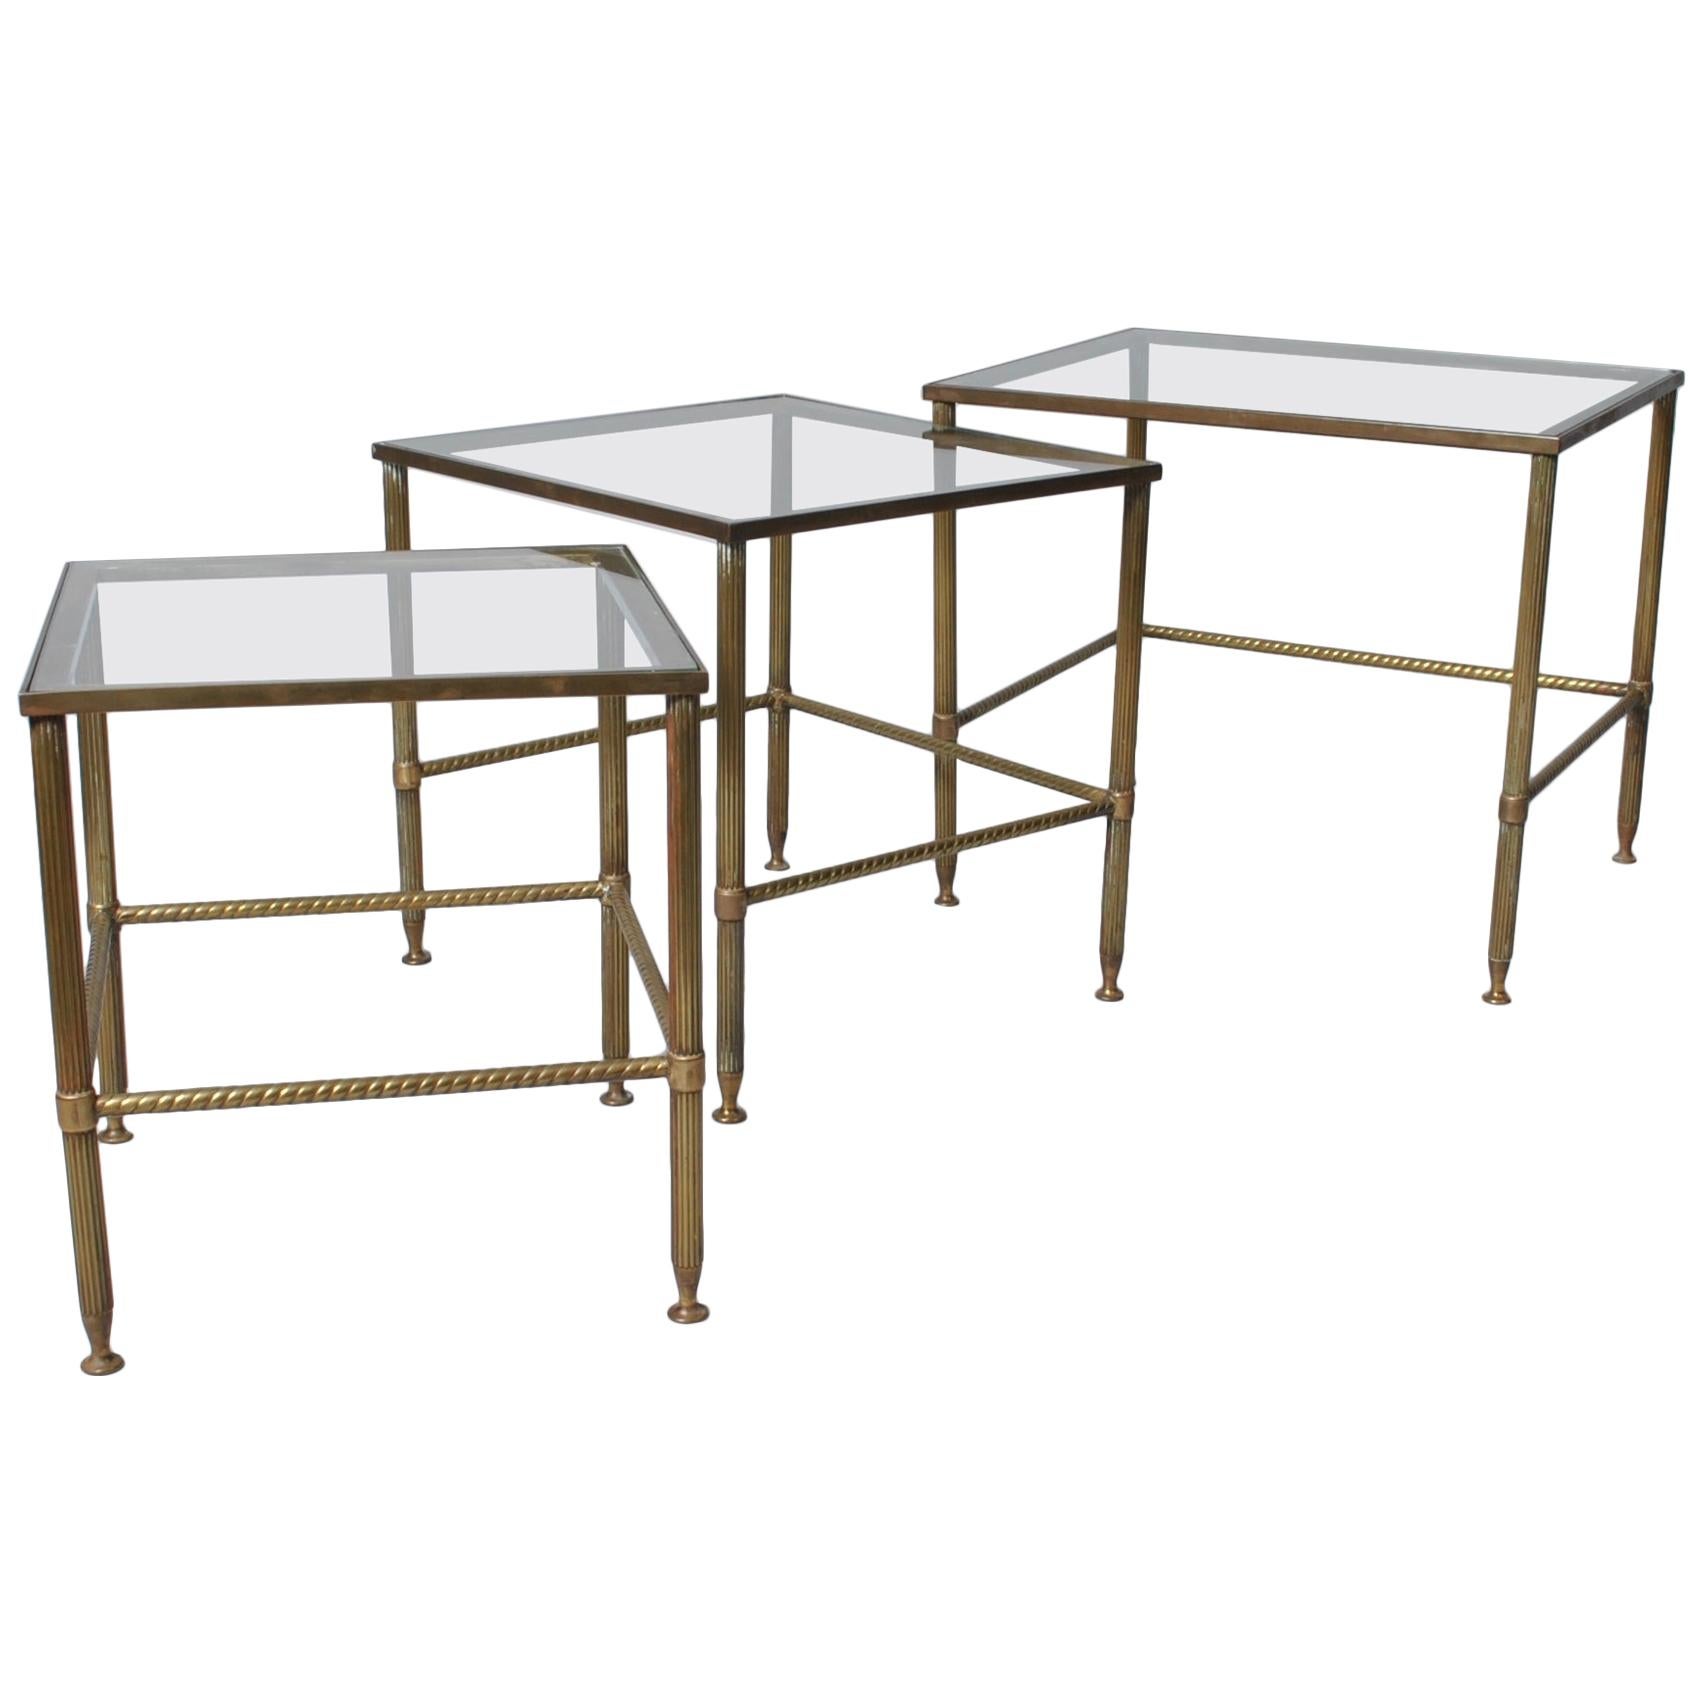 A set of very fine quality midcentury French Maison nesting tables. Produced in France, circa 1950. Superb aged patination to the brass roped and fluted frames. Classic, stylish and practical pieces.
         